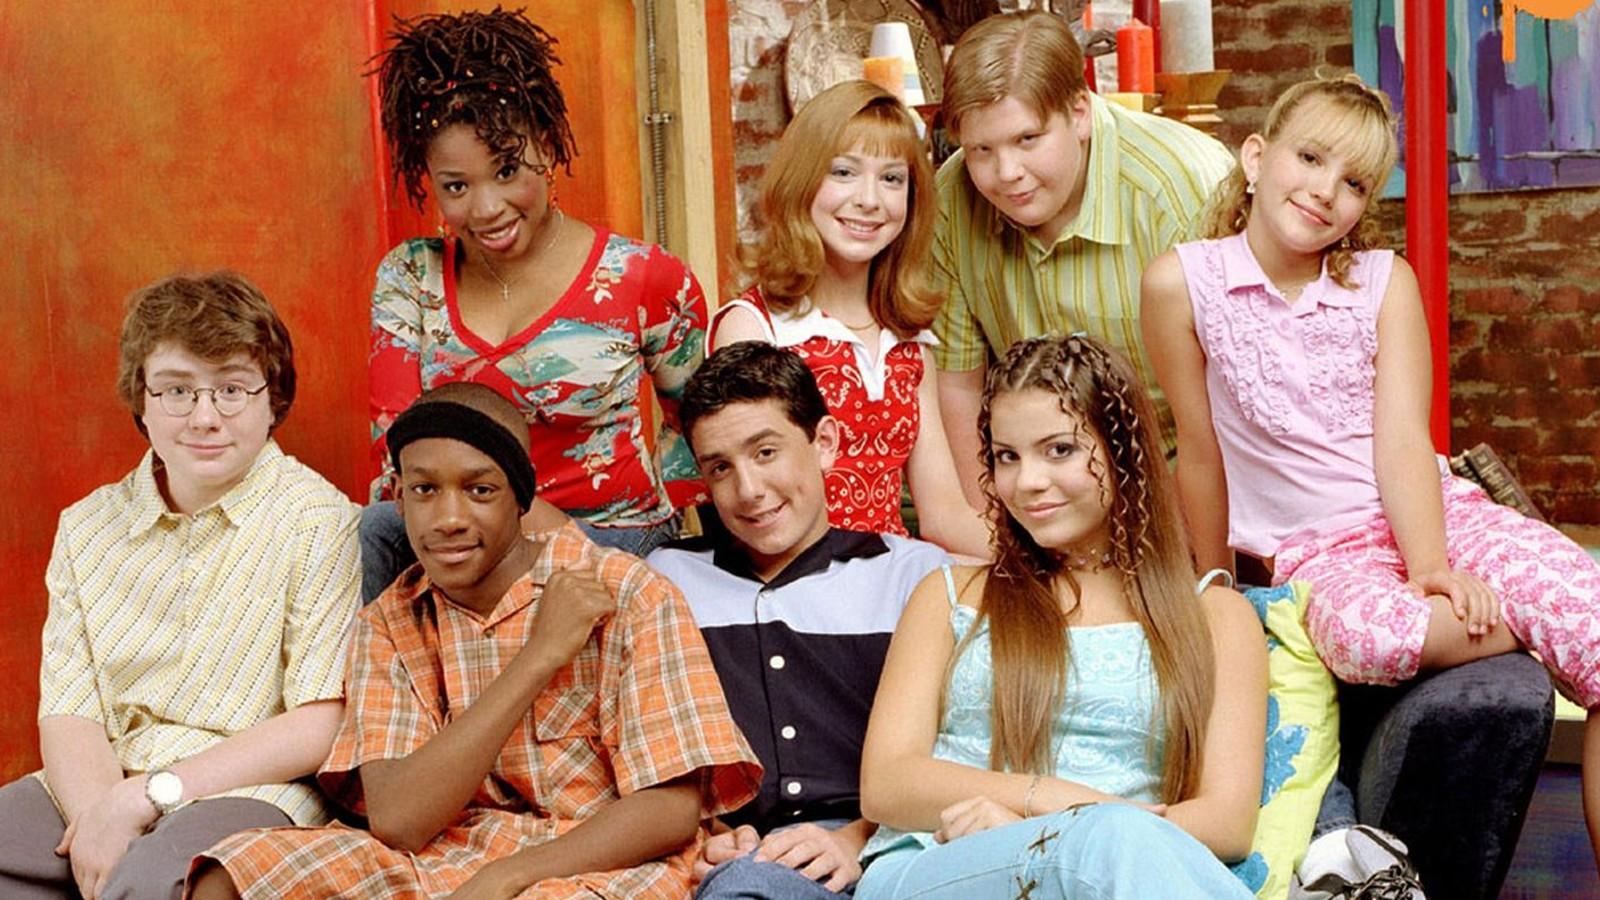 Shane Lyons and the cast of All That